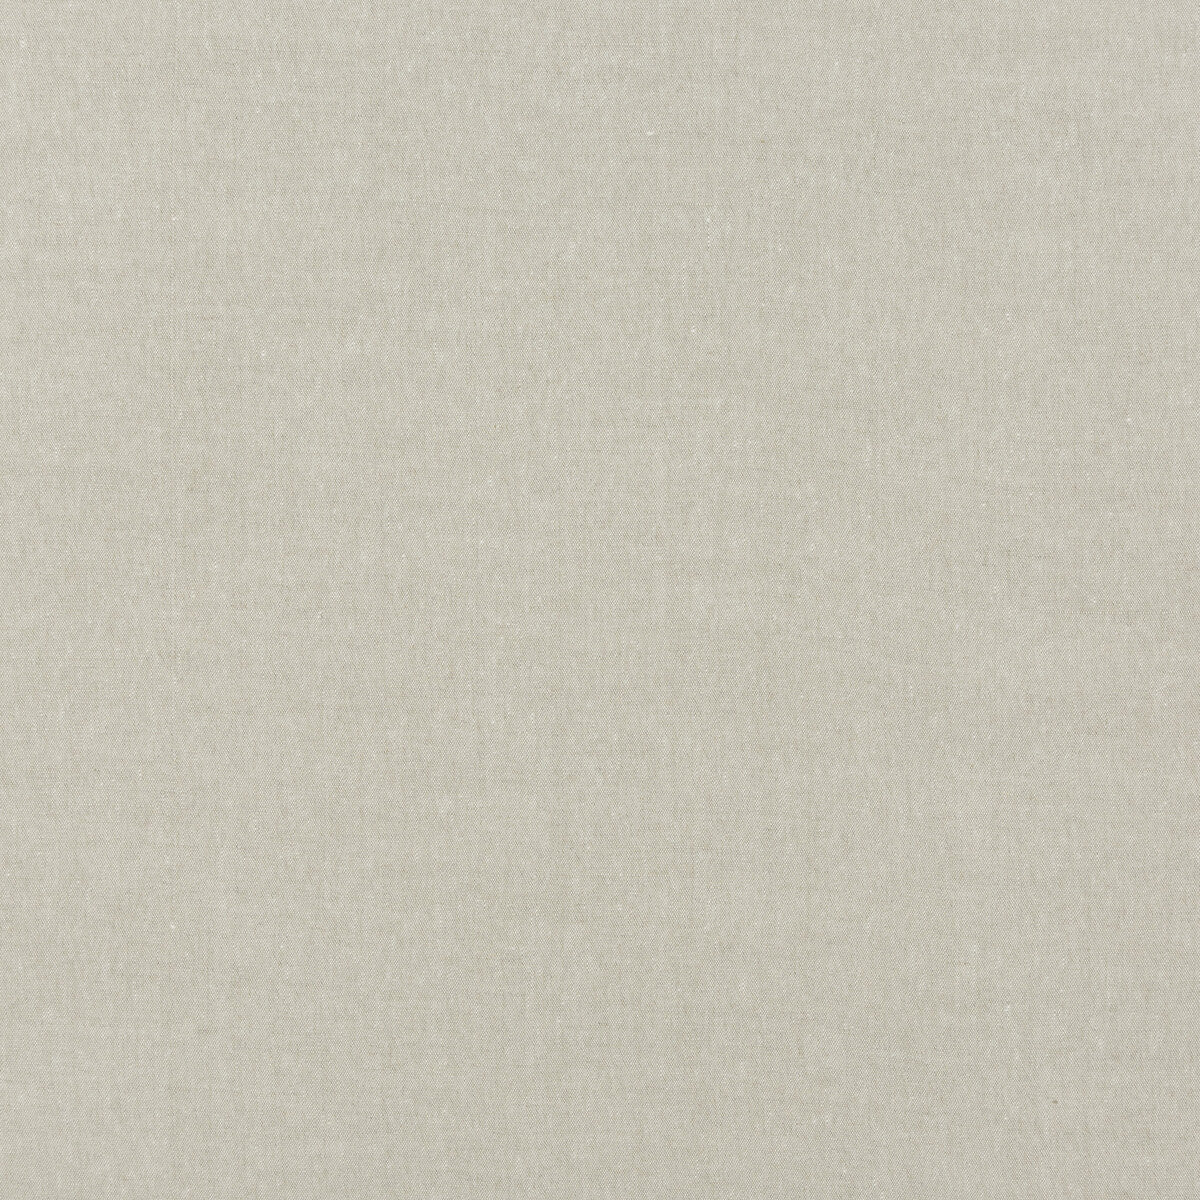 Meridian Linen fabric in marble color - pattern ED85281.106.0 - by Threads in the Meridian collection